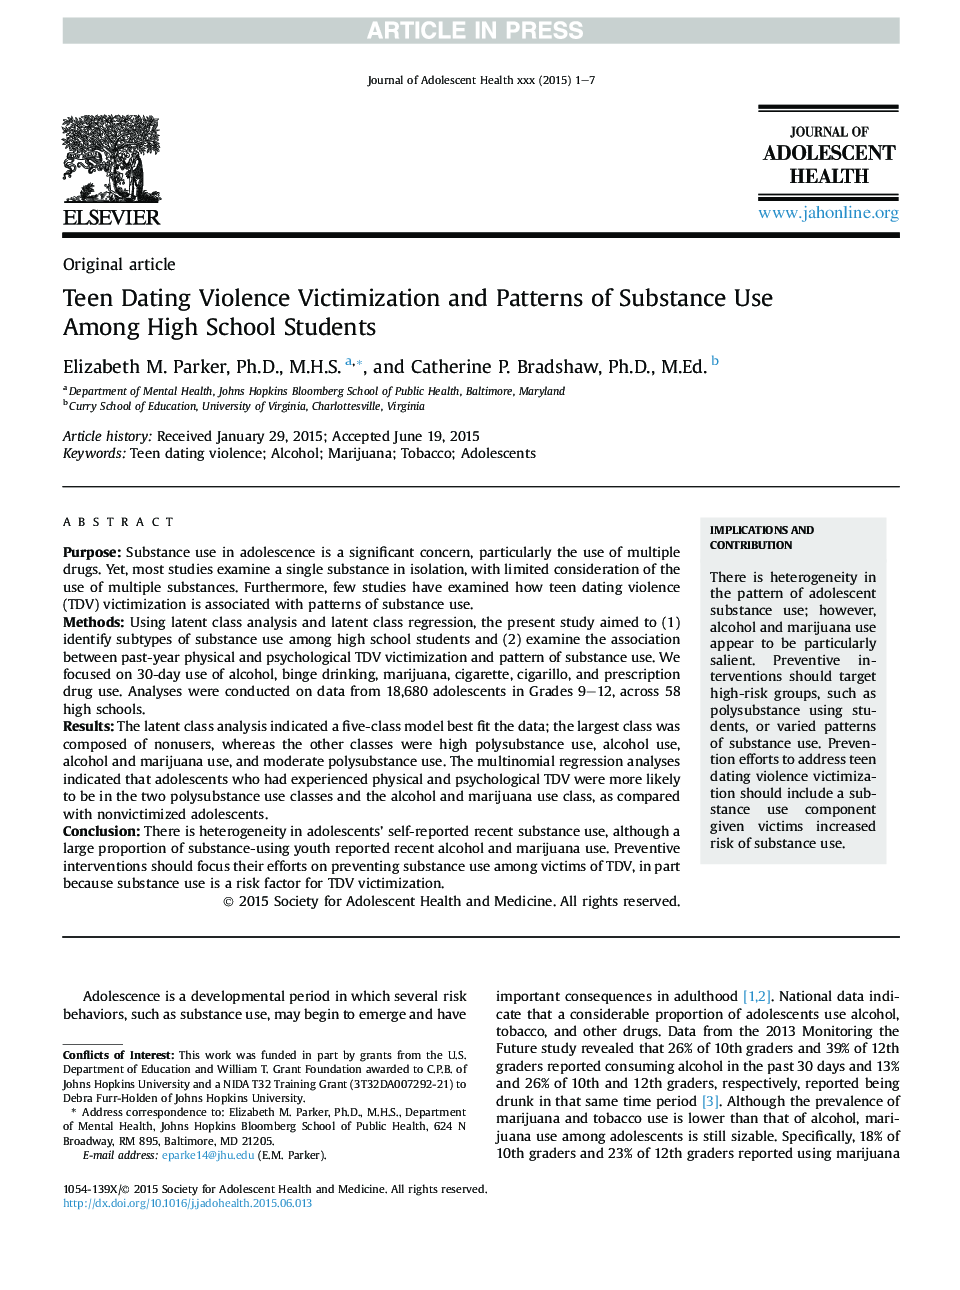 Teen Dating Violence Victimization and Patterns of Substance Use Among High School Students